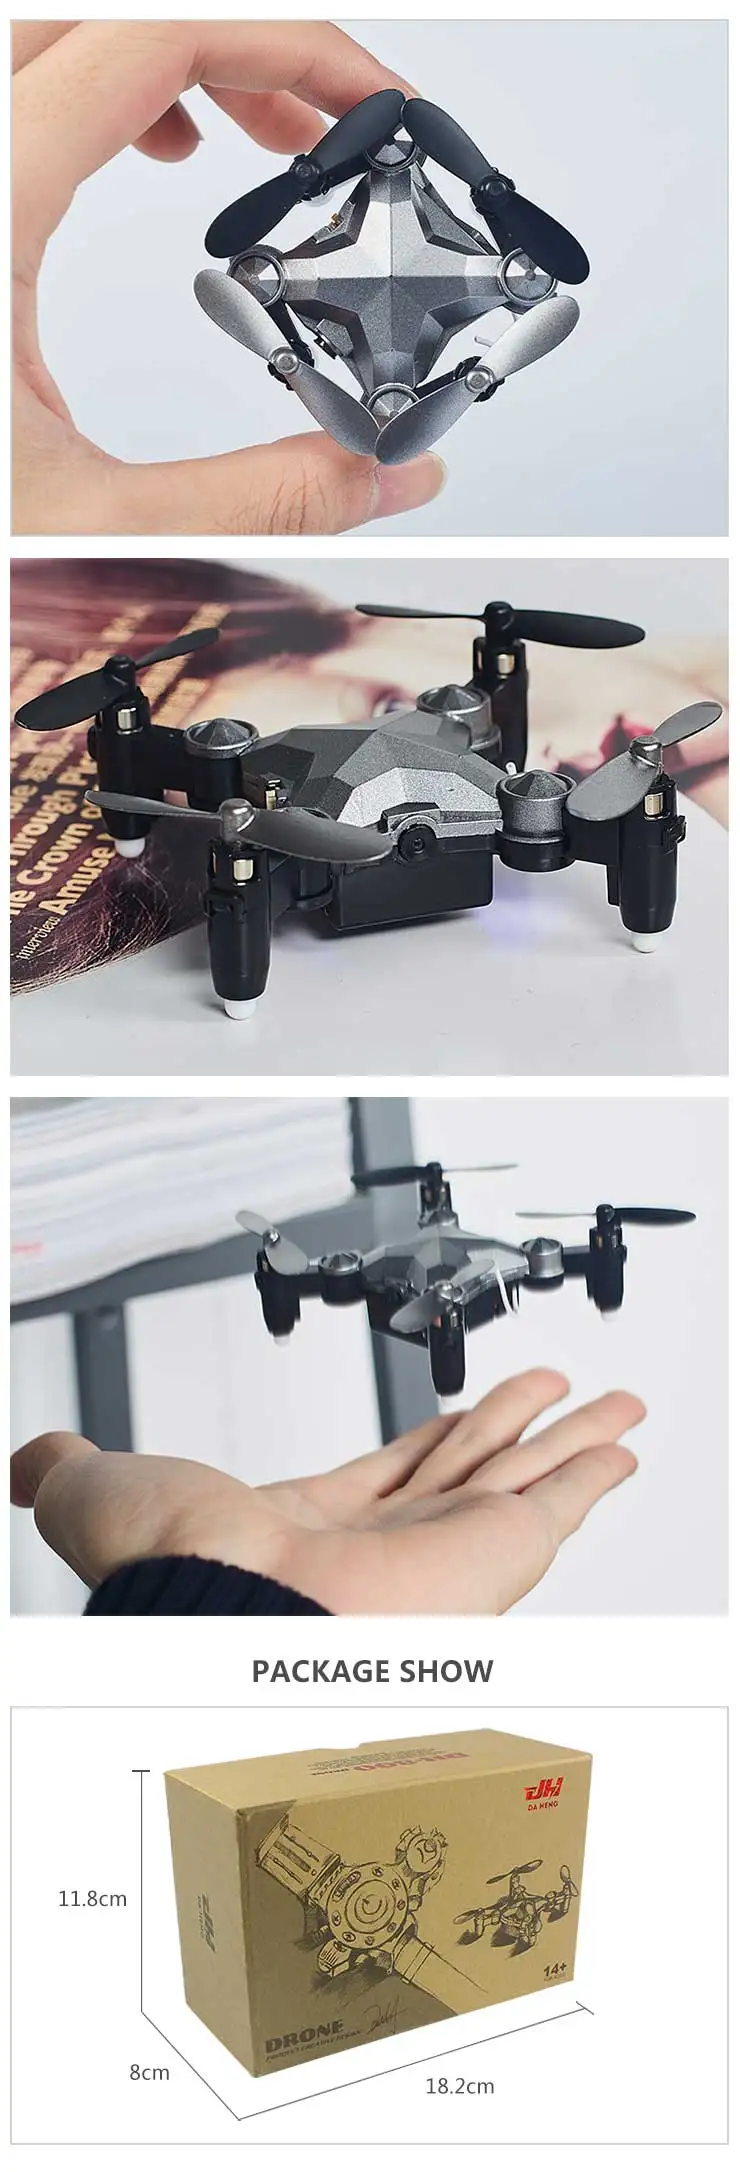 dh800 drone price